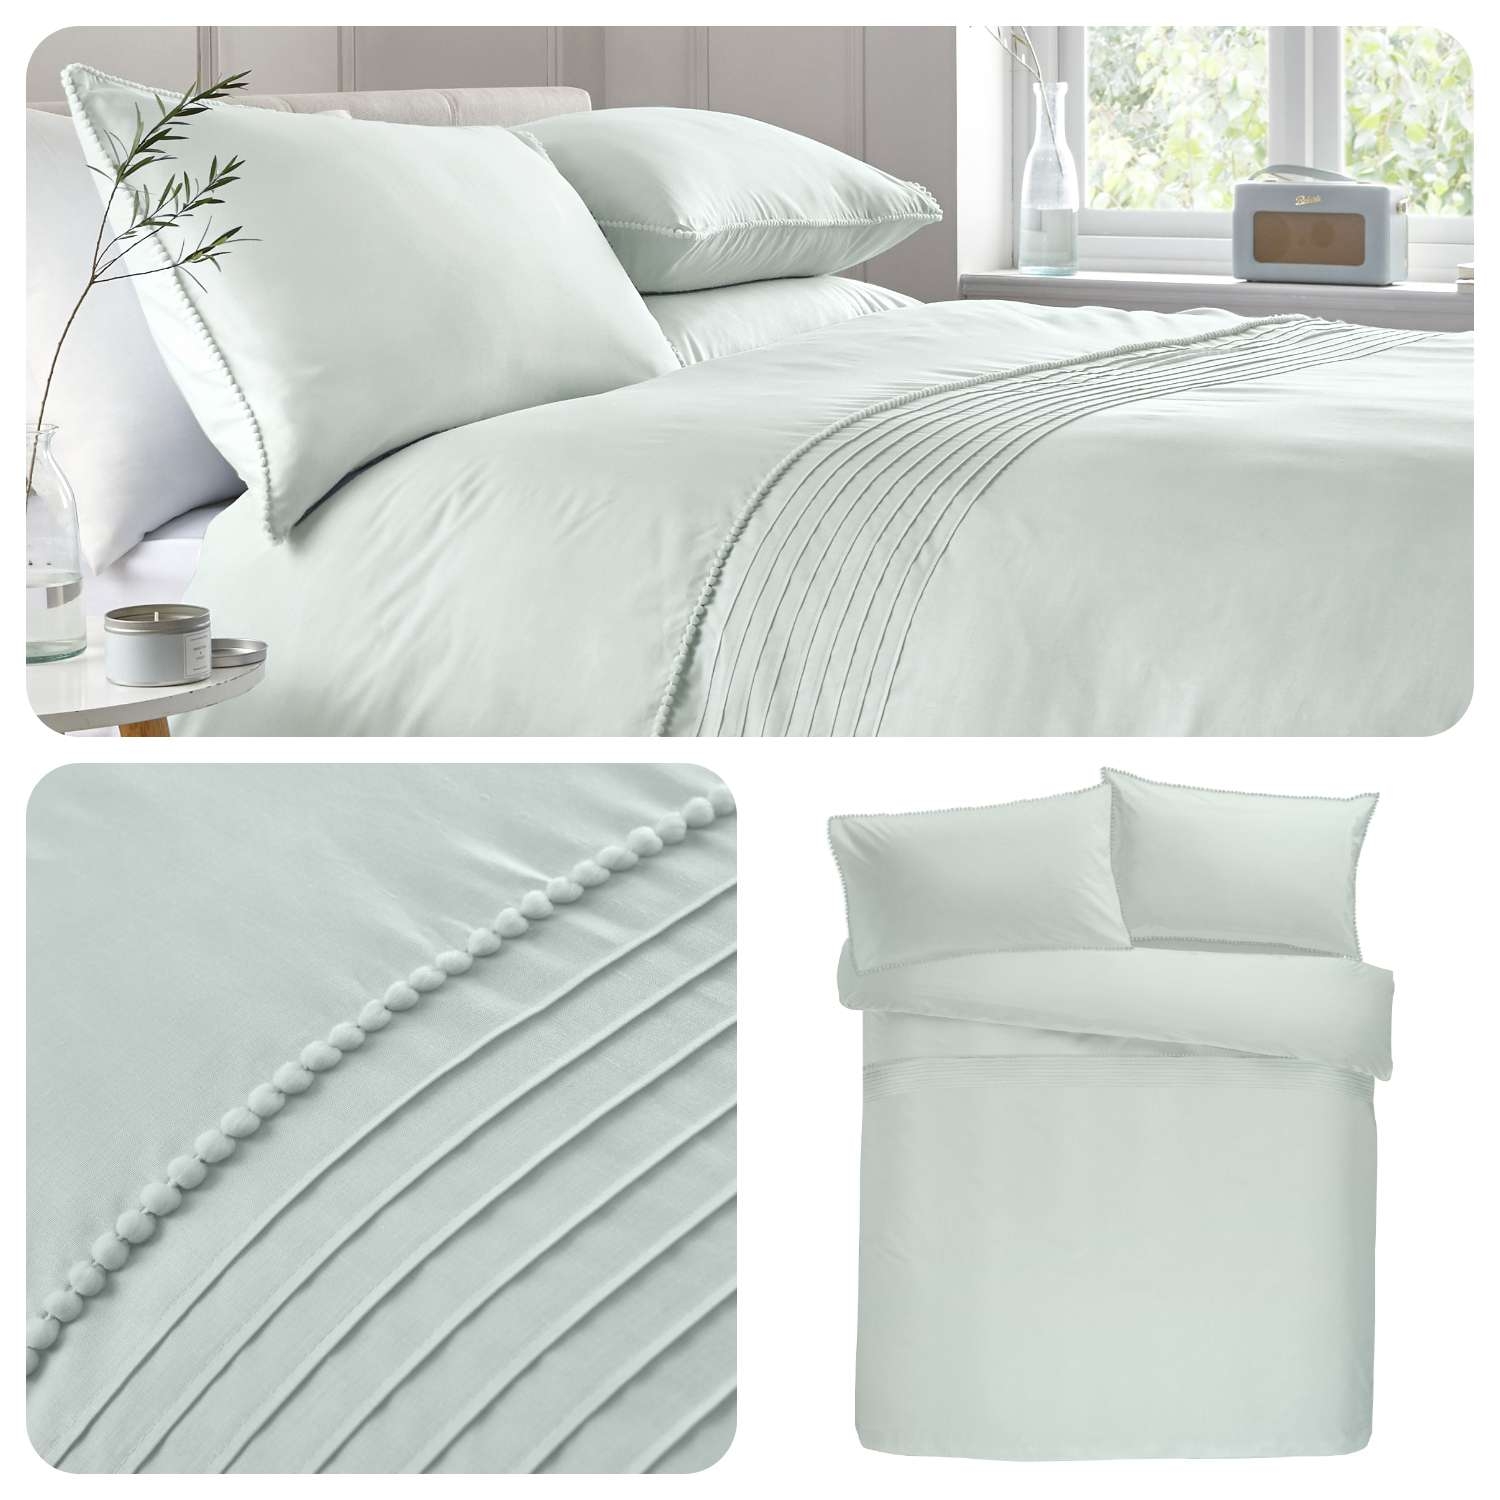 Duck Egg Bedlam Duvet Cover and Two Pillow Cases 52% Polyester / 48% Cotton Set: Double 